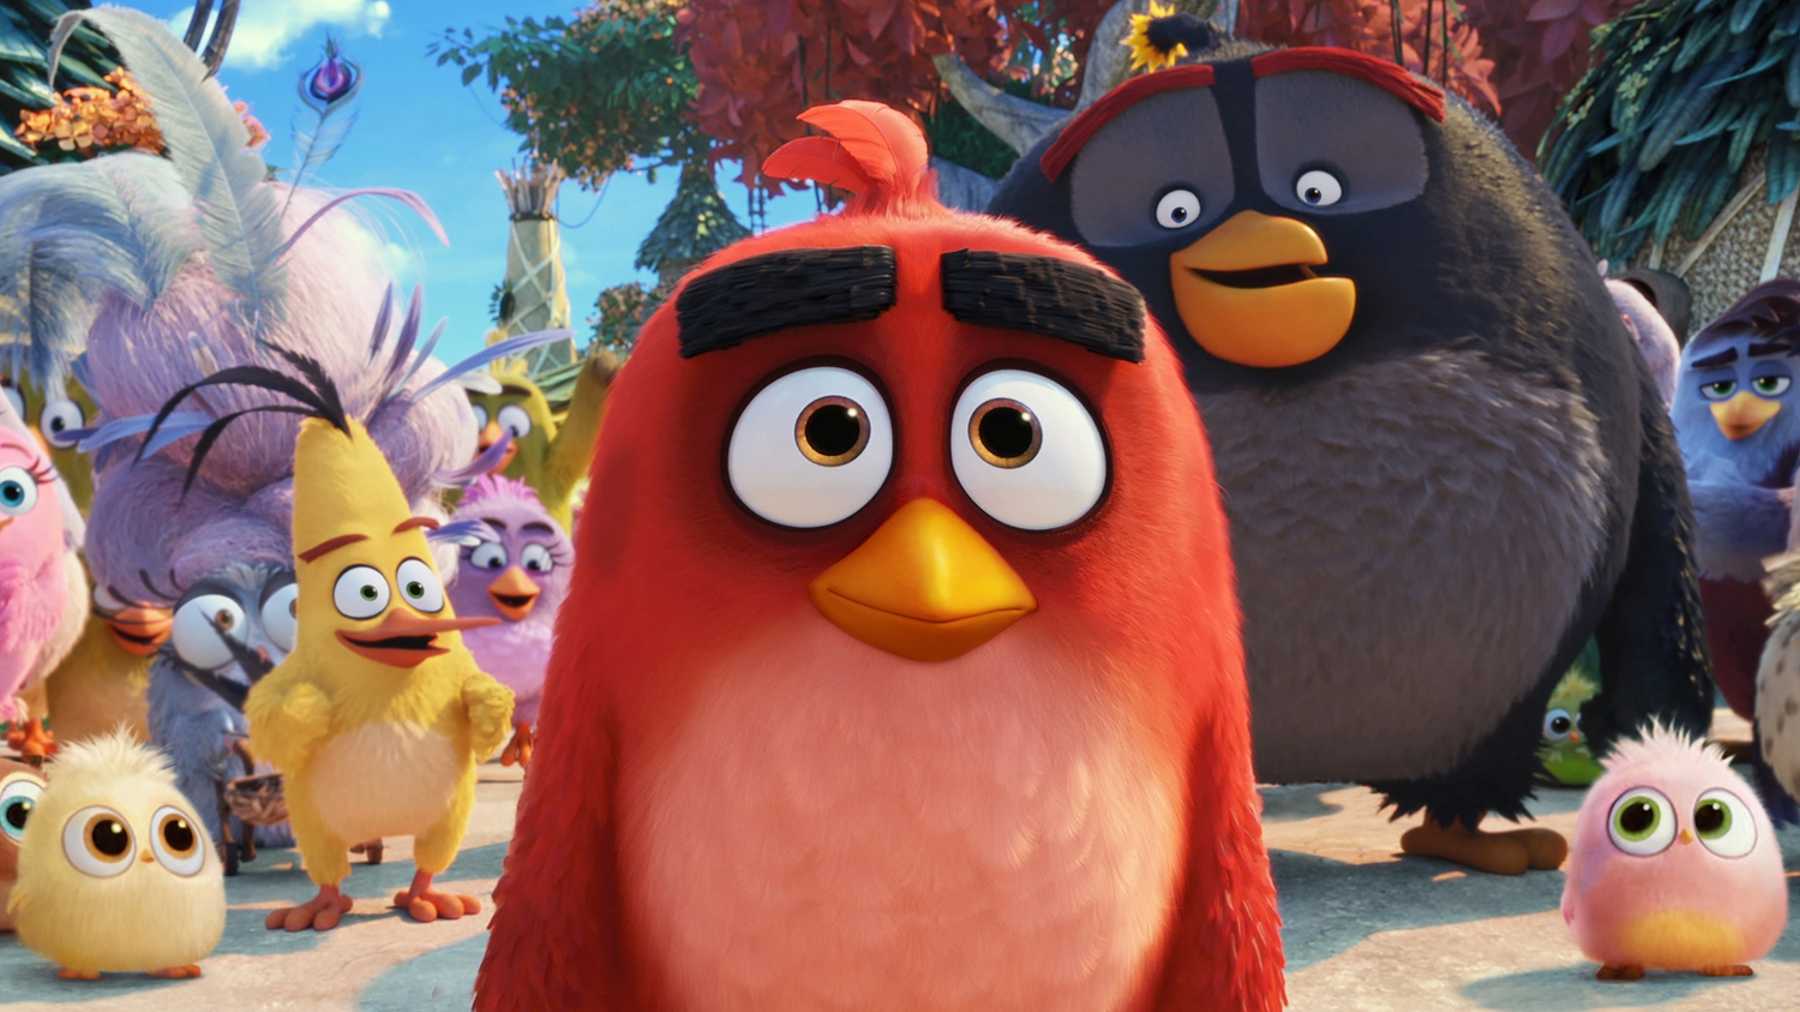 angry-birds-3-movie-in-development-at-sony-pictures